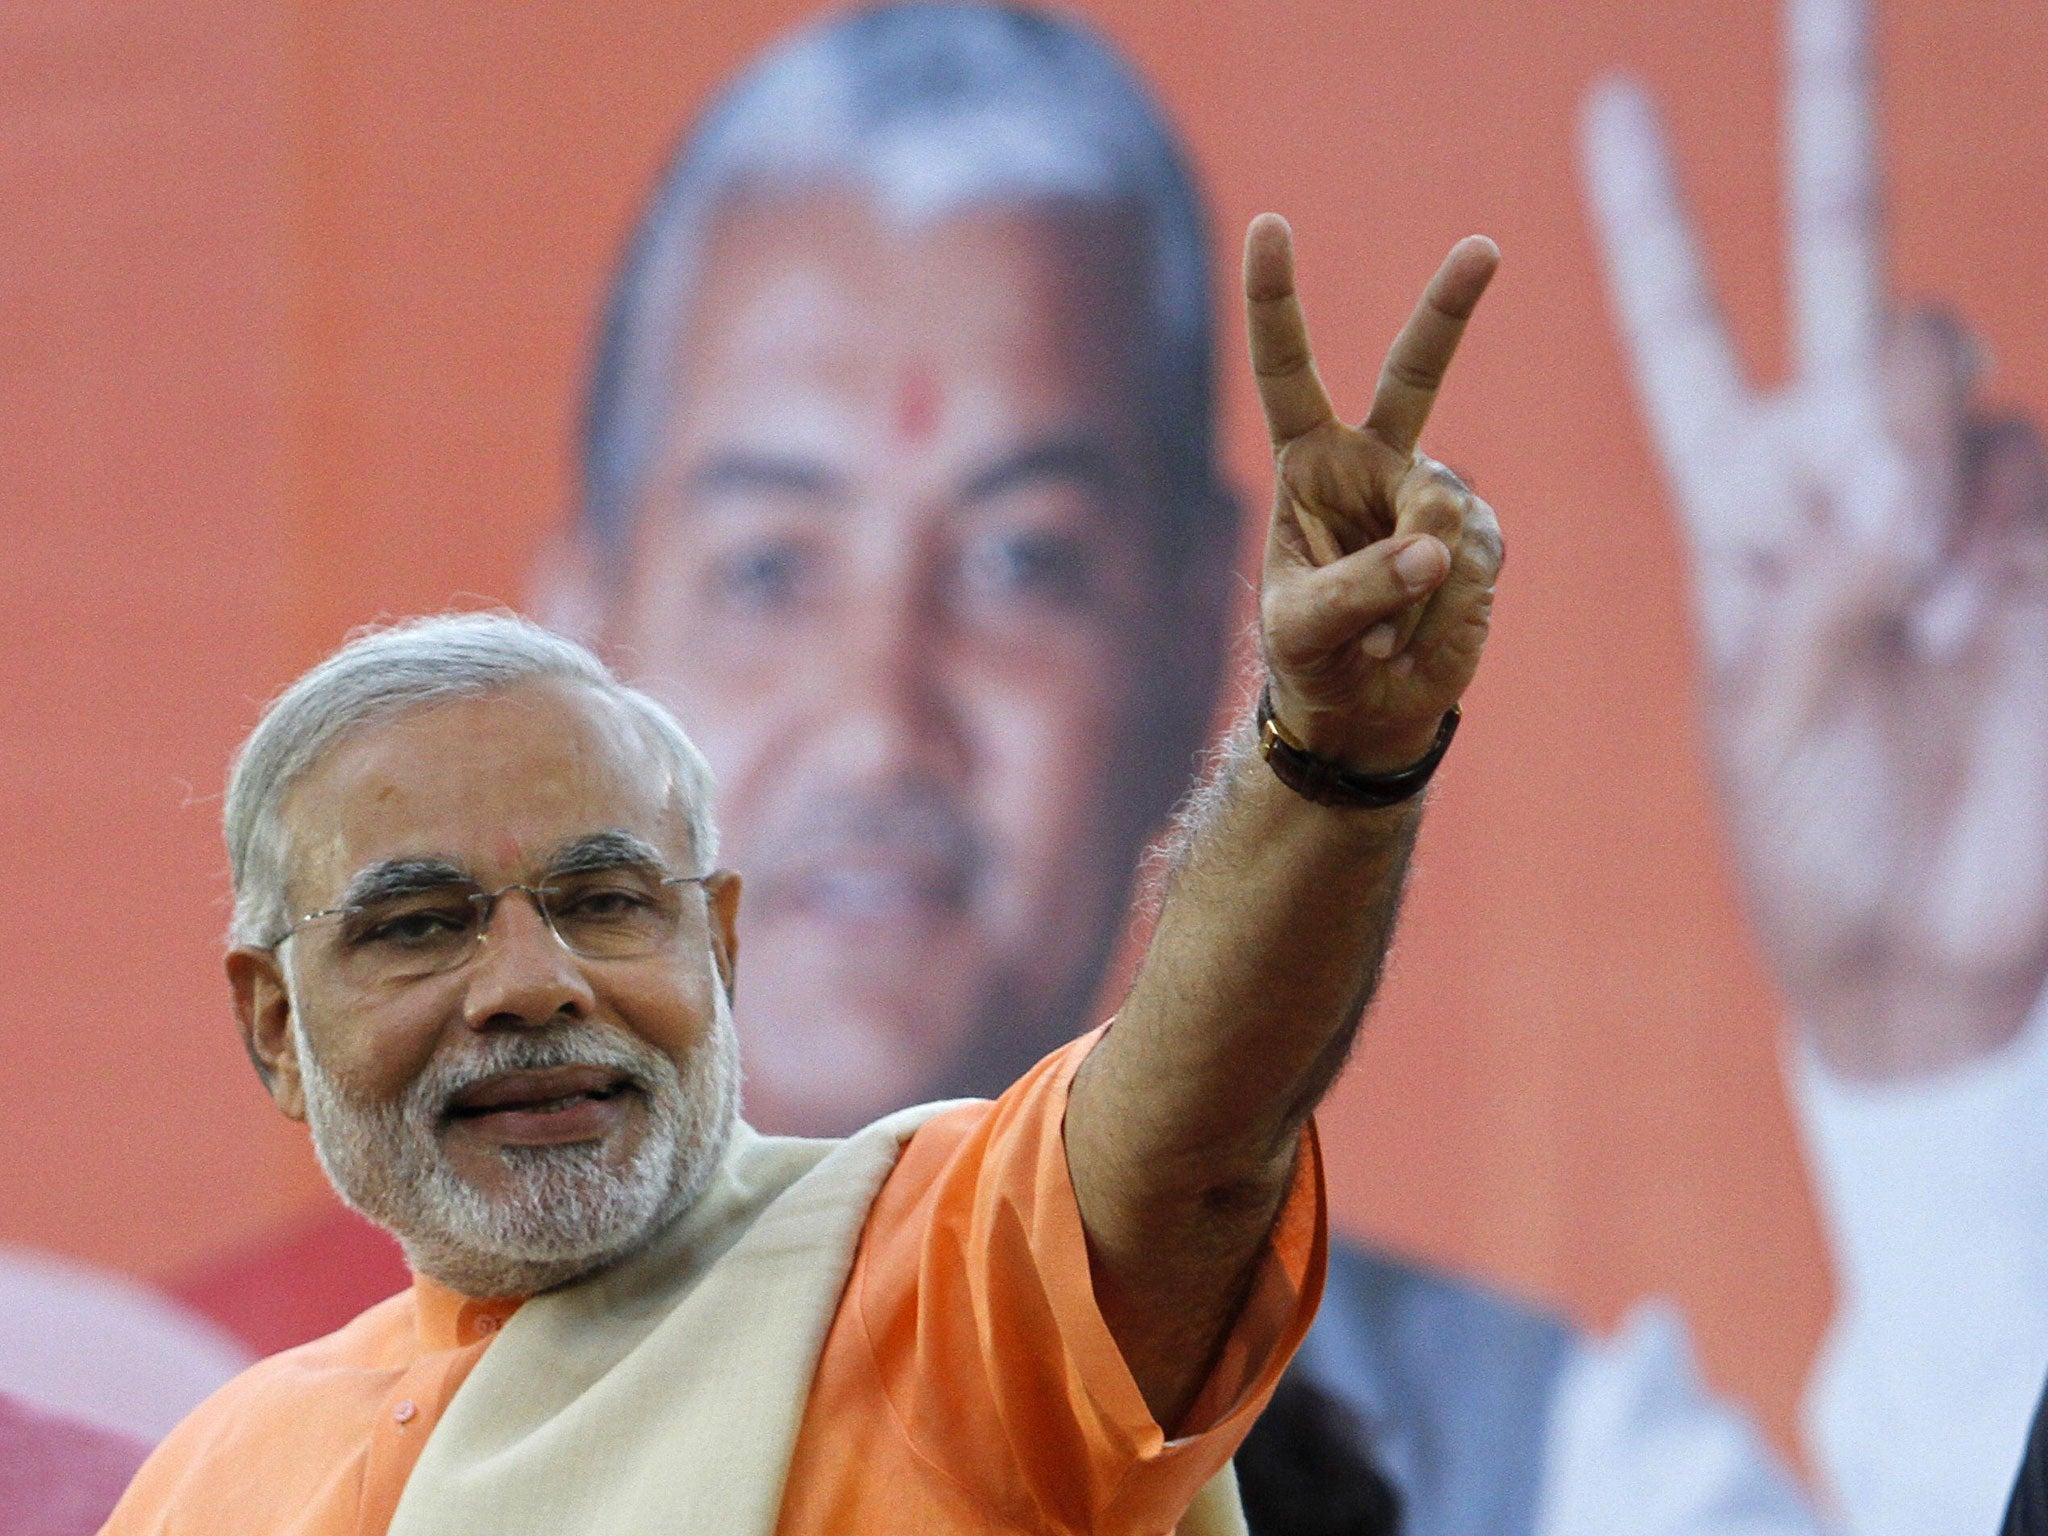 Narendra Modi, chief minister of Gujarat state, gestures on the podium